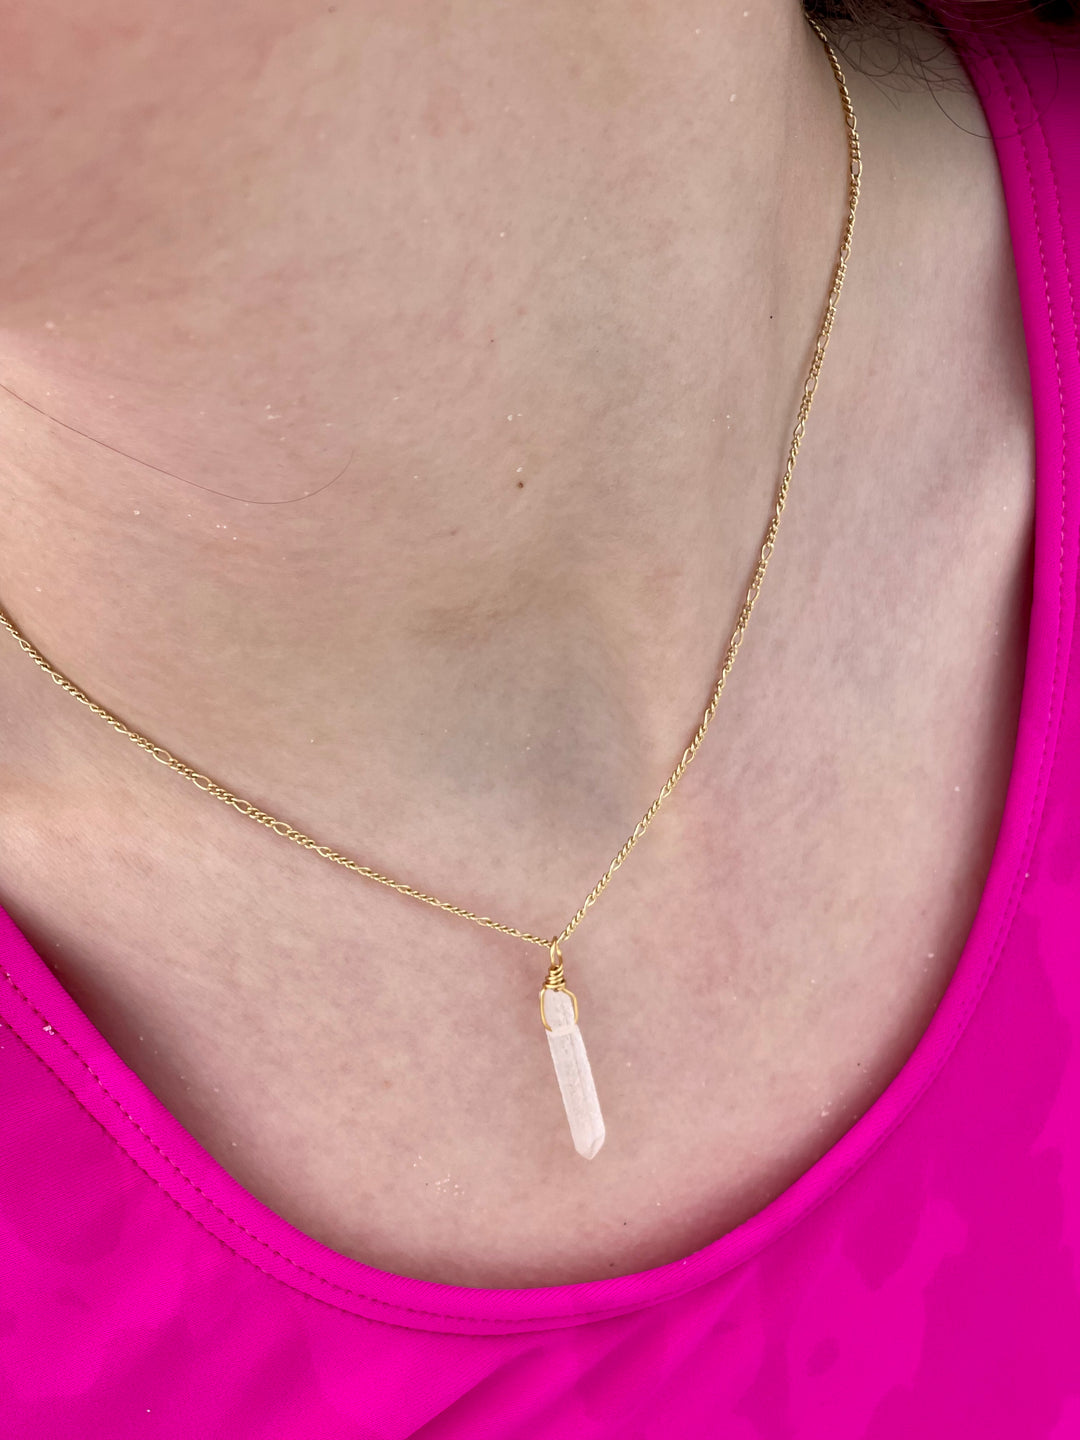 Raw Quartz Spike Necklace in Gold-Filled